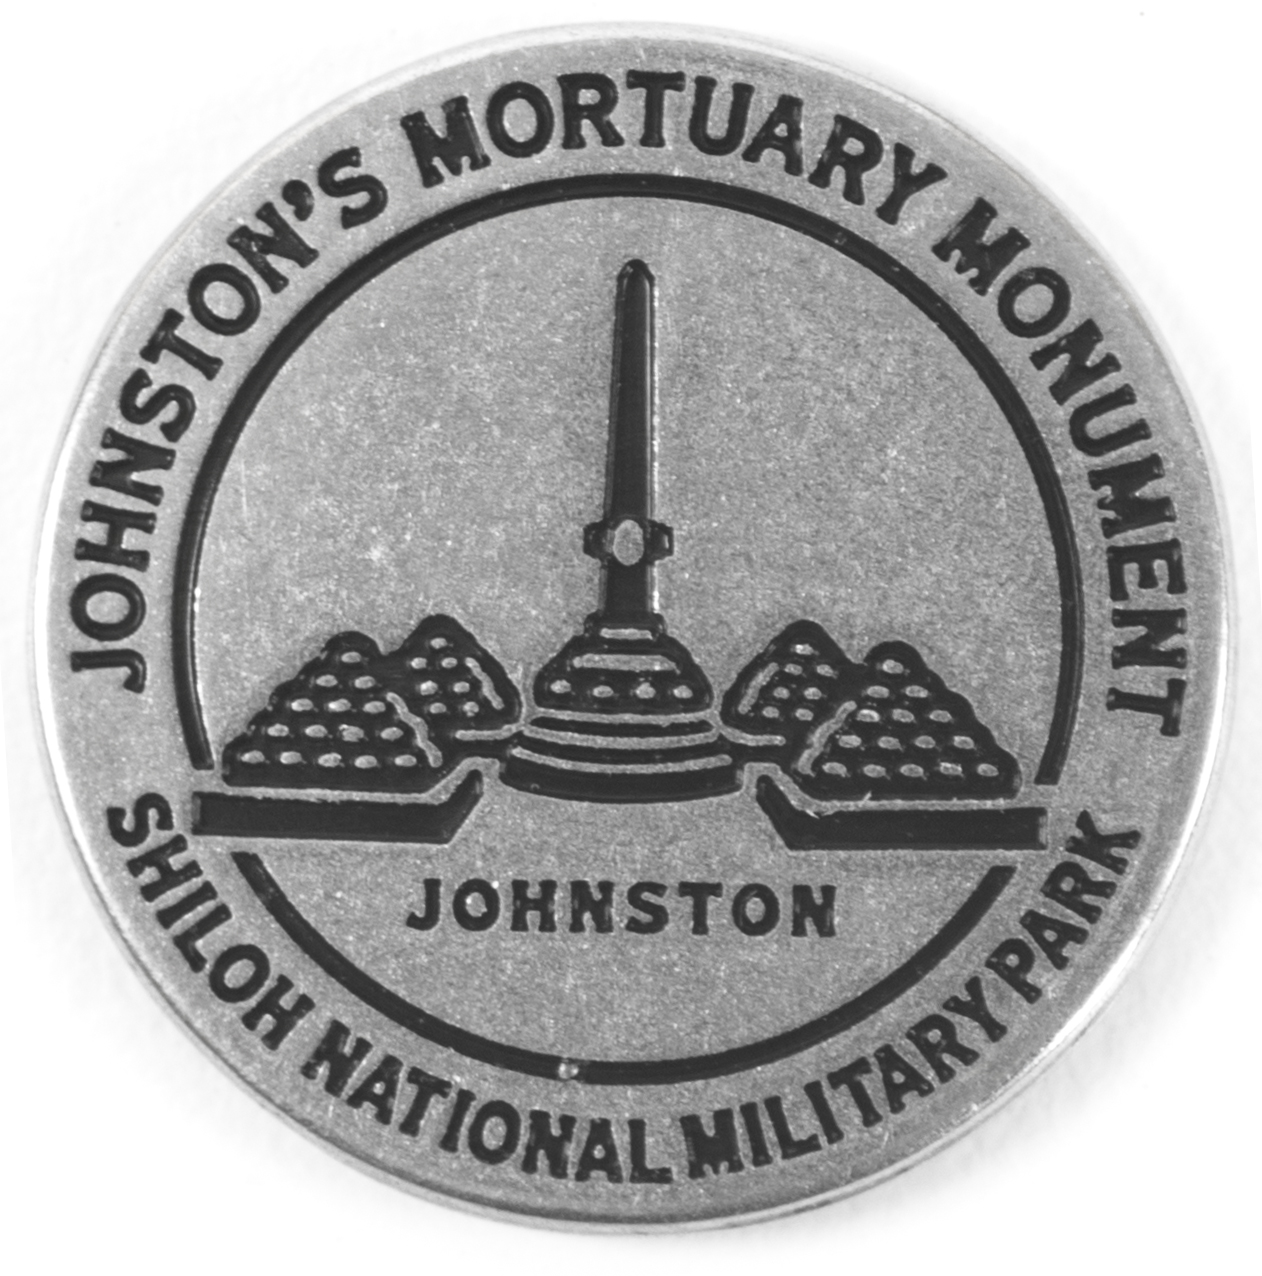 Shiloh National Military Park token front